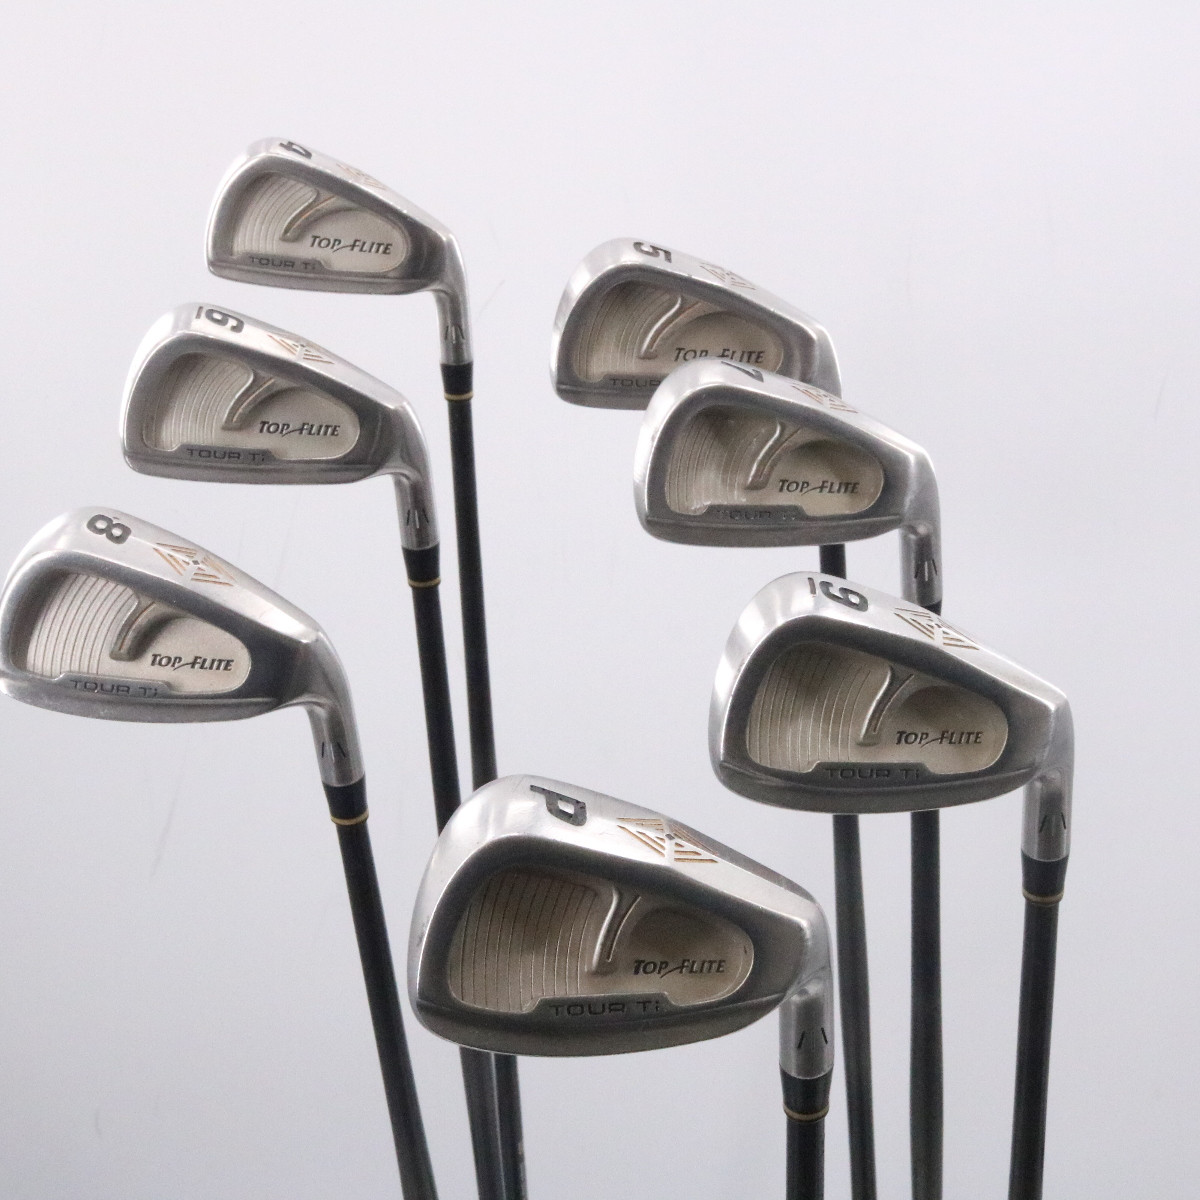 top flite tour irons year